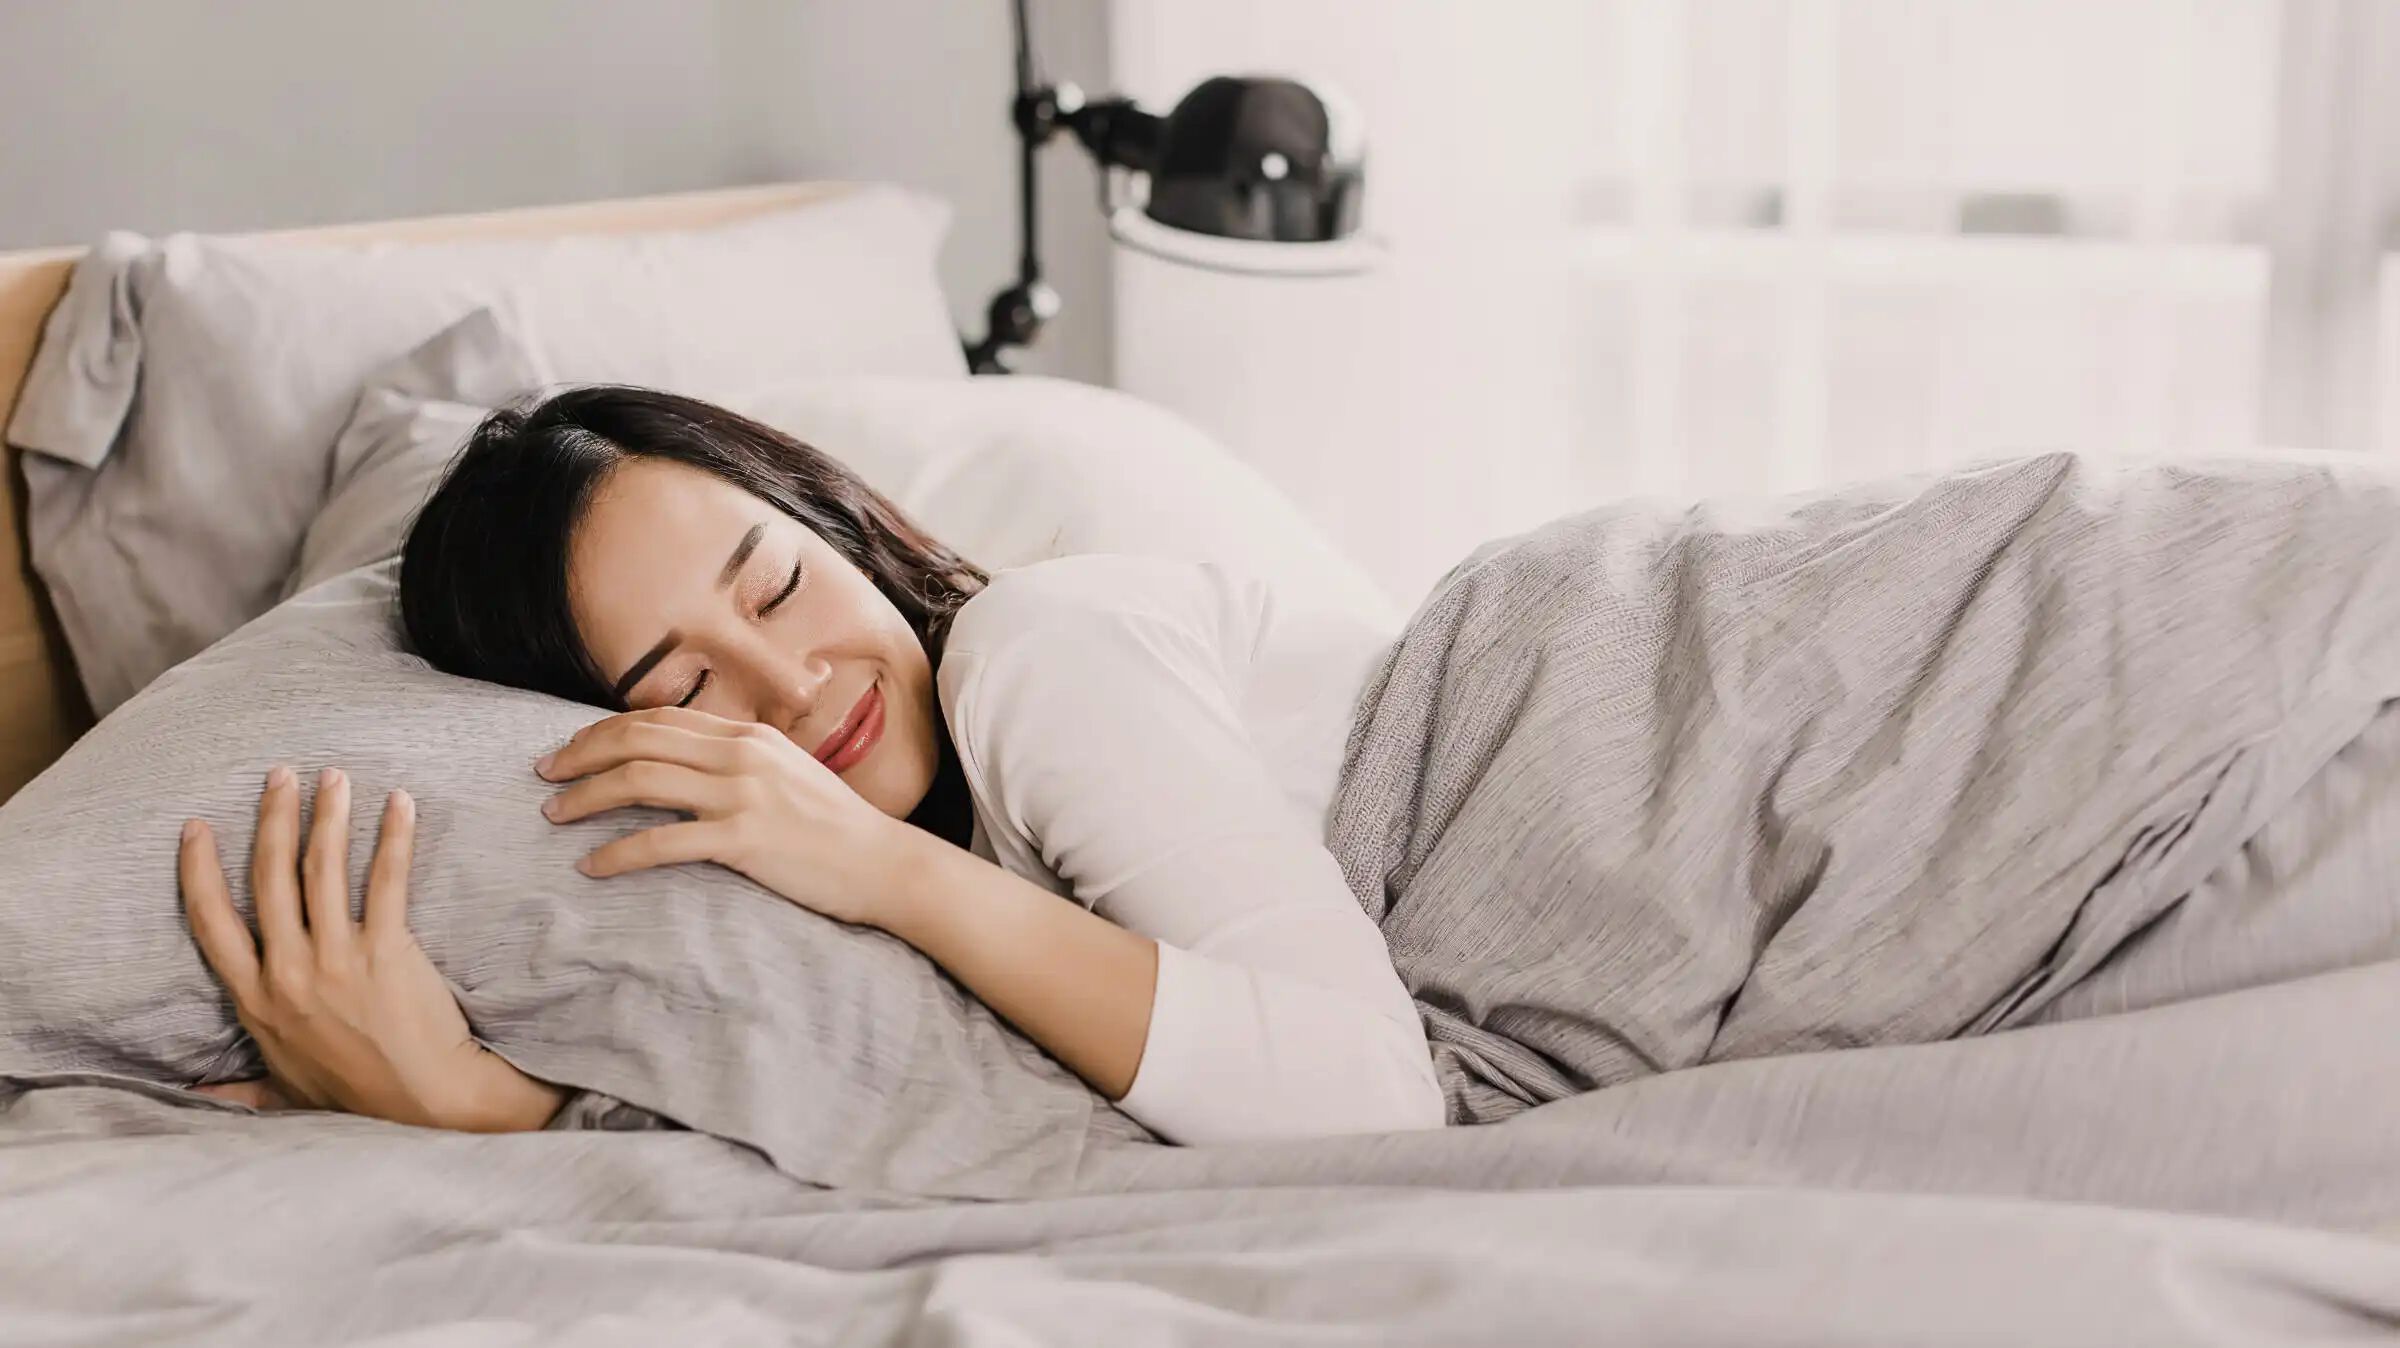 What is the Importance of Sleep for Immune System?